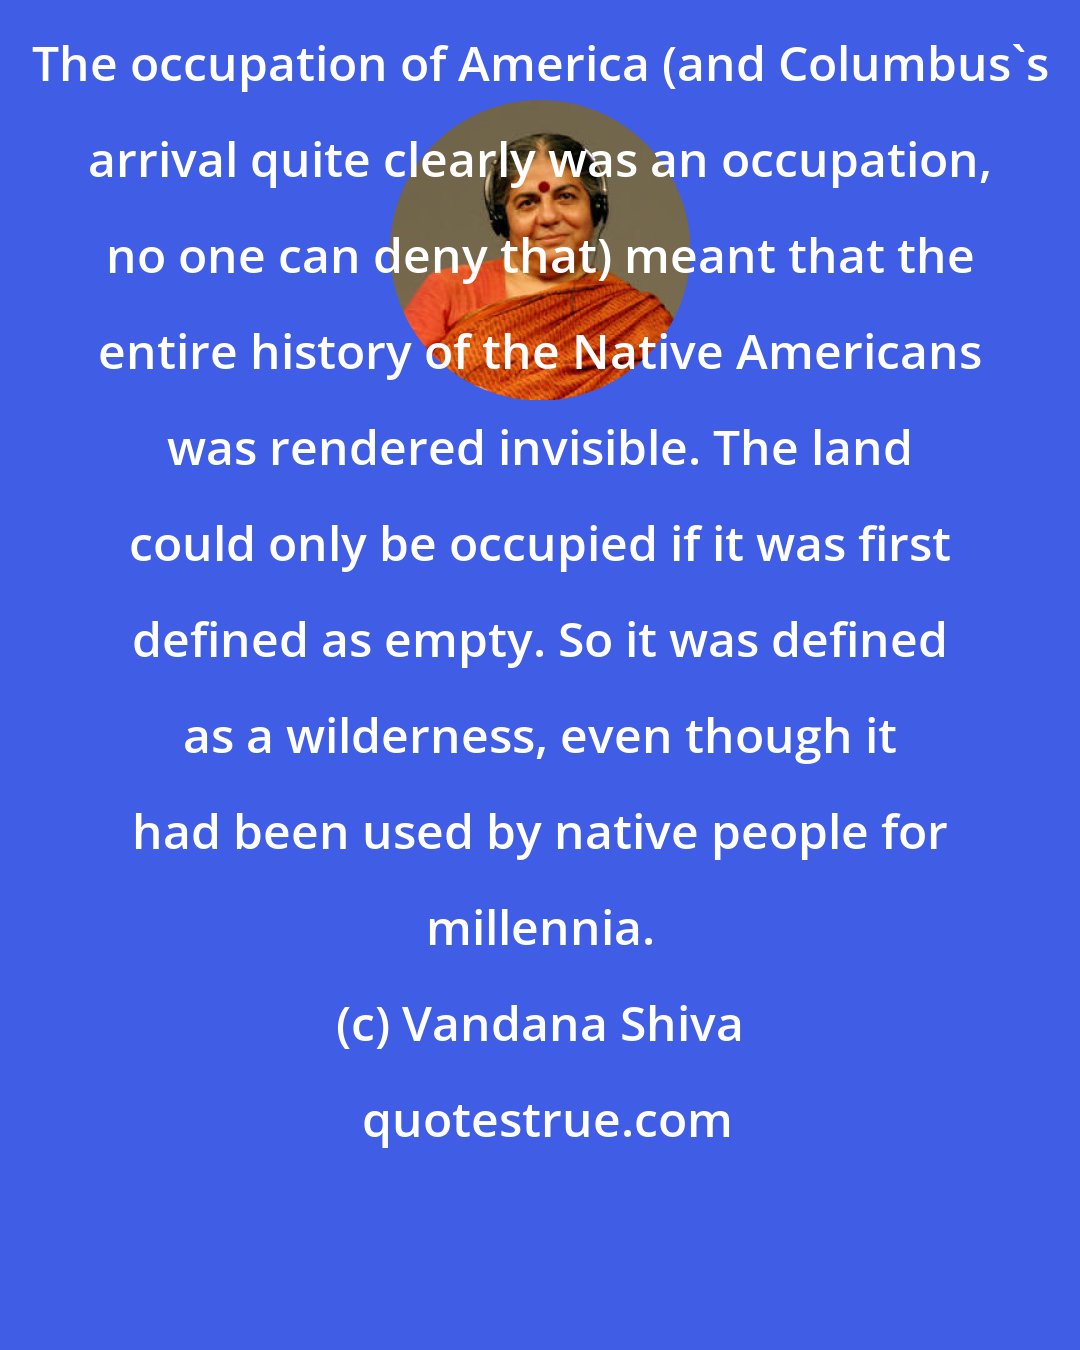 Vandana Shiva: The occupation of America (and Columbus's arrival quite clearly was an occupation, no one can deny that) meant that the entire history of the Native Americans was rendered invisible. The land could only be occupied if it was first defined as empty. So it was defined as a wilderness, even though it had been used by native people for millennia.